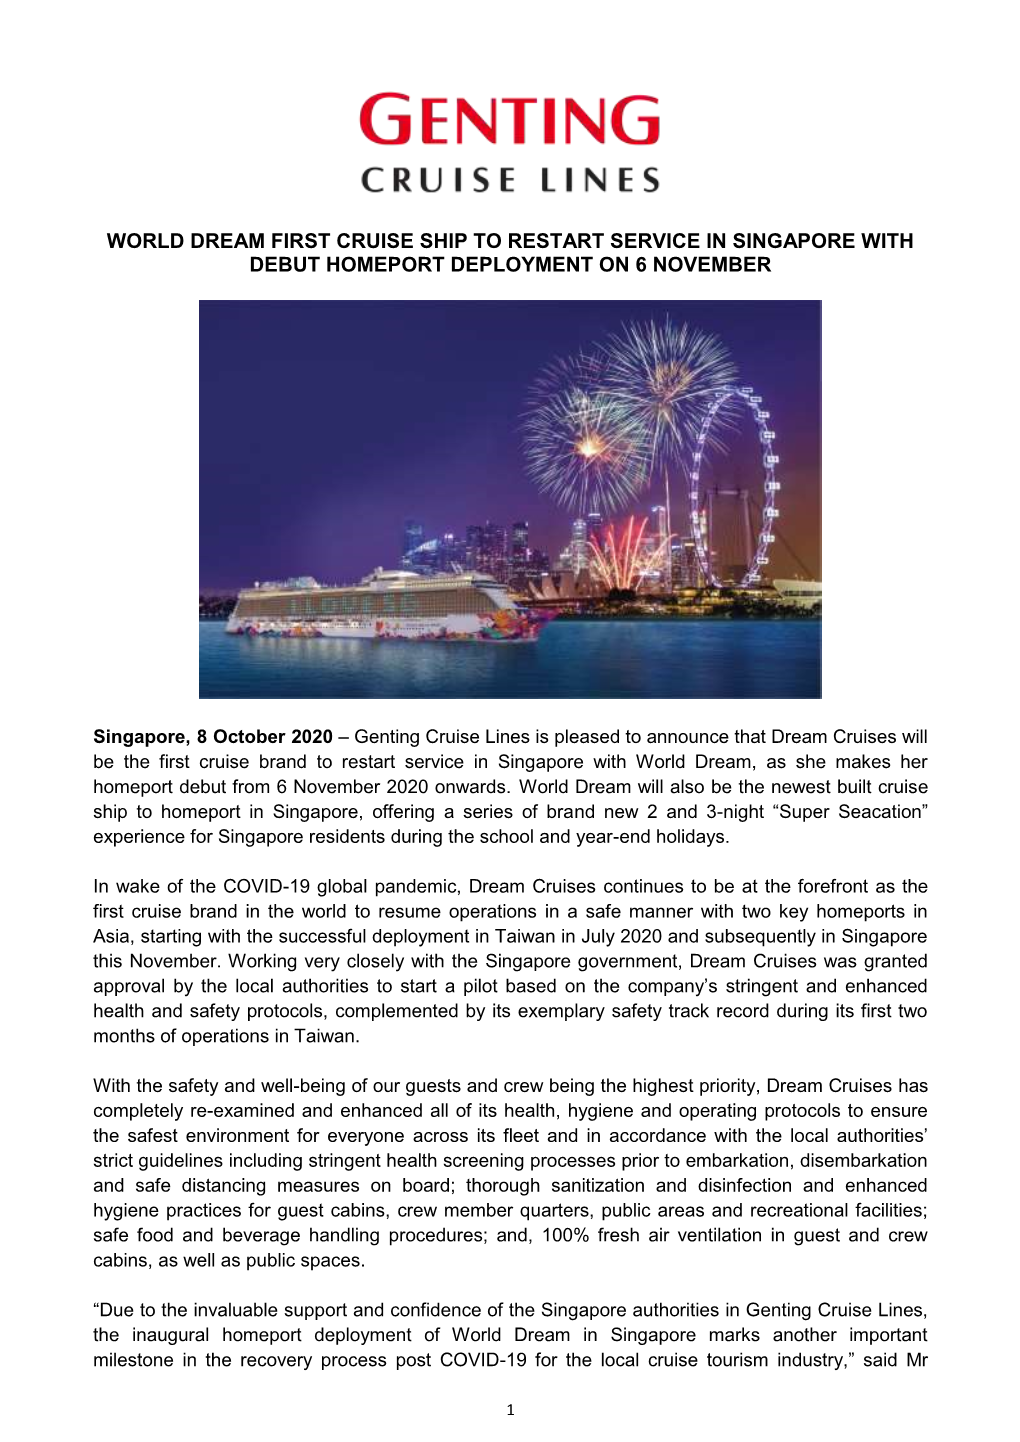 World Dream First Cruise Ship to Restart Service in Singapore with Debut Homeport Deployment on 6 November